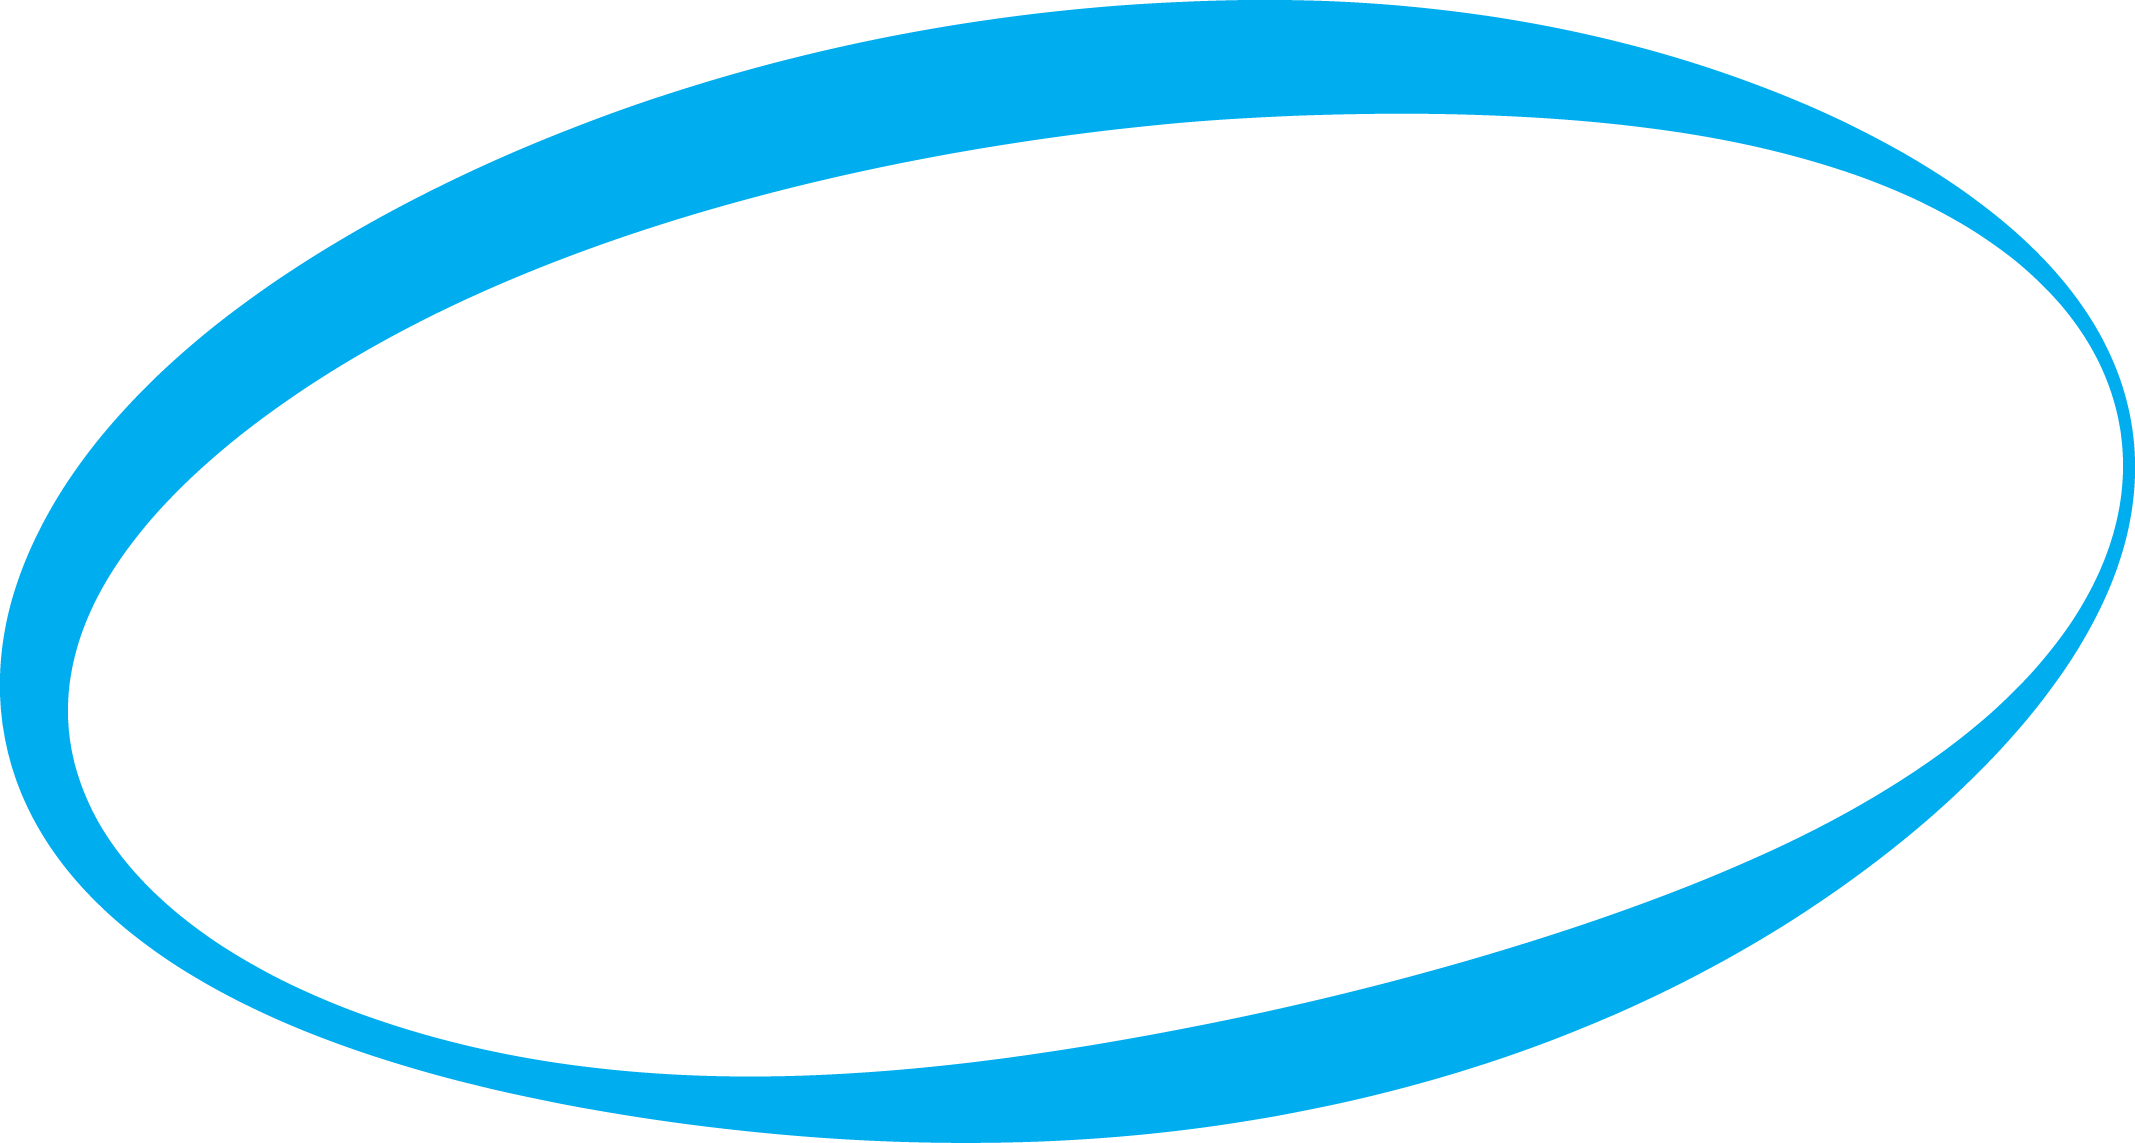 Youth Action Network